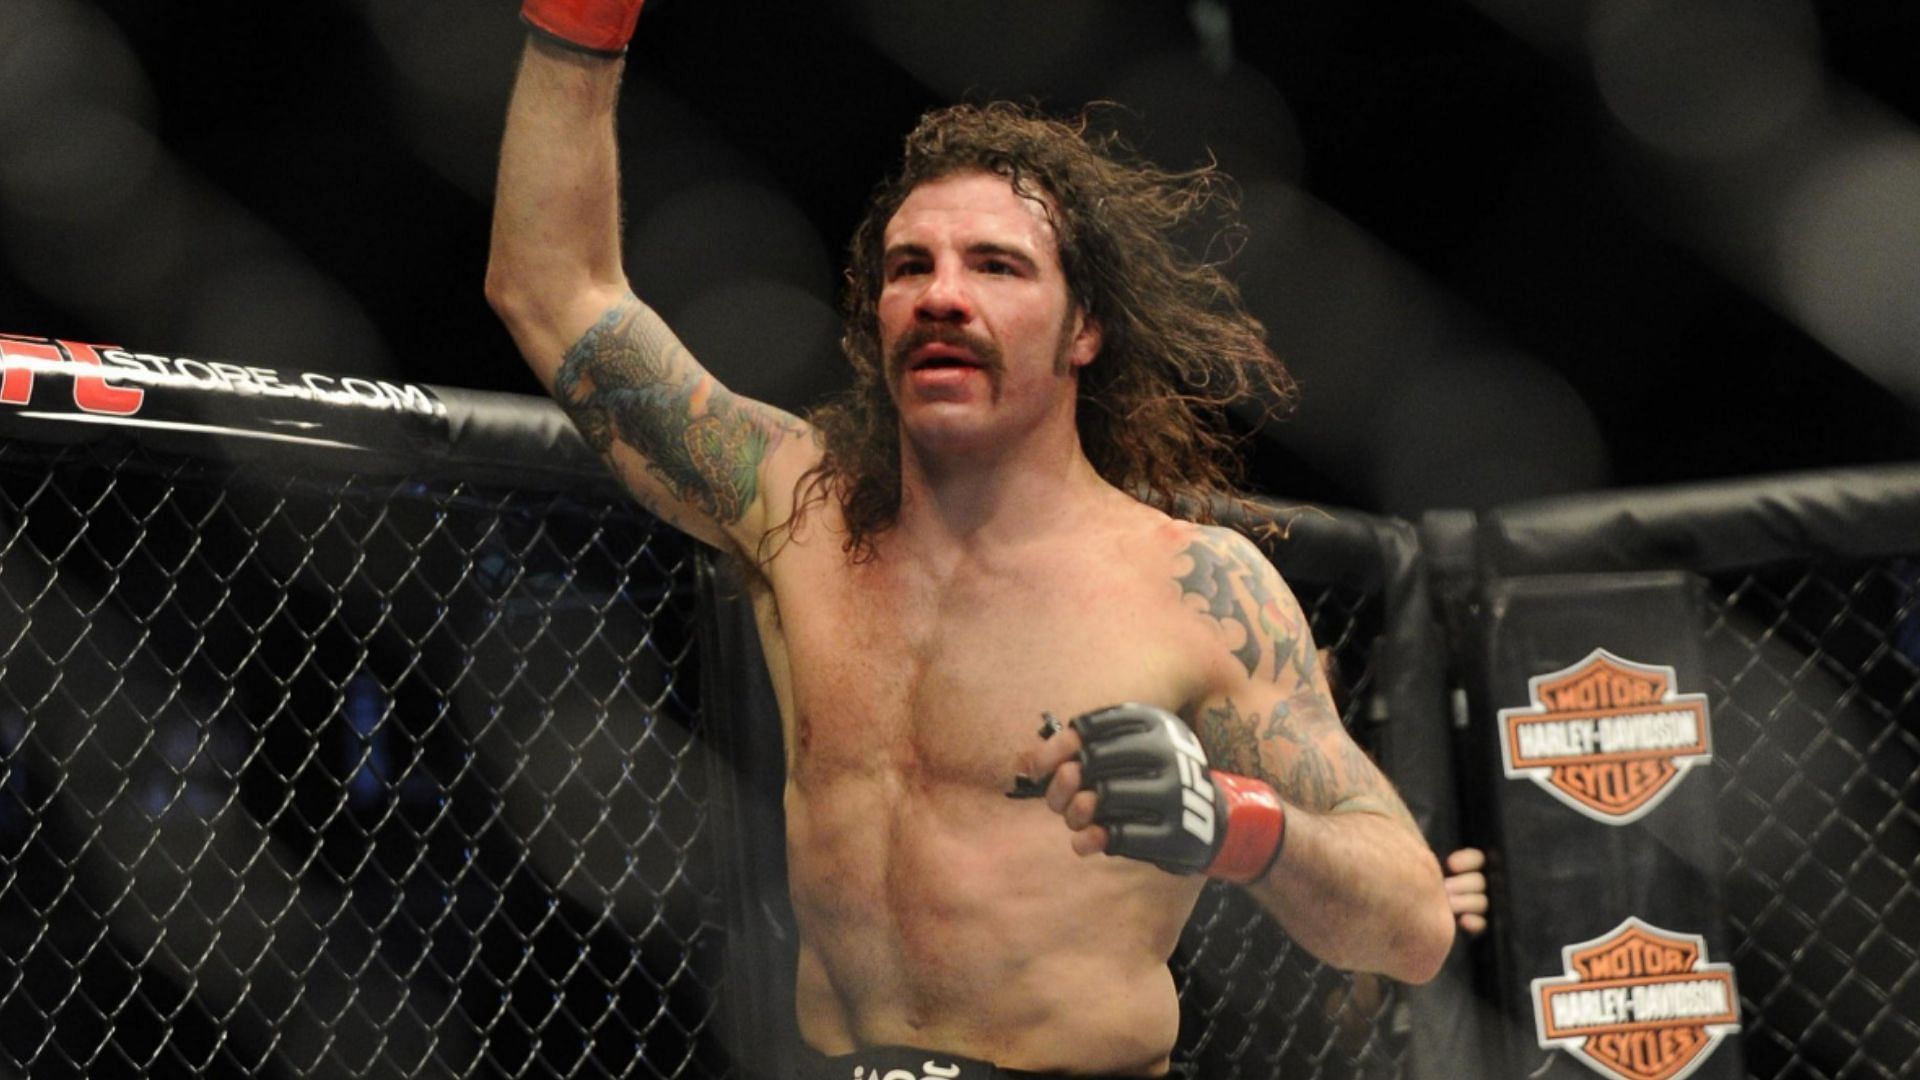 Clay Guida [Image courtesy of @clayguida on Instagram]